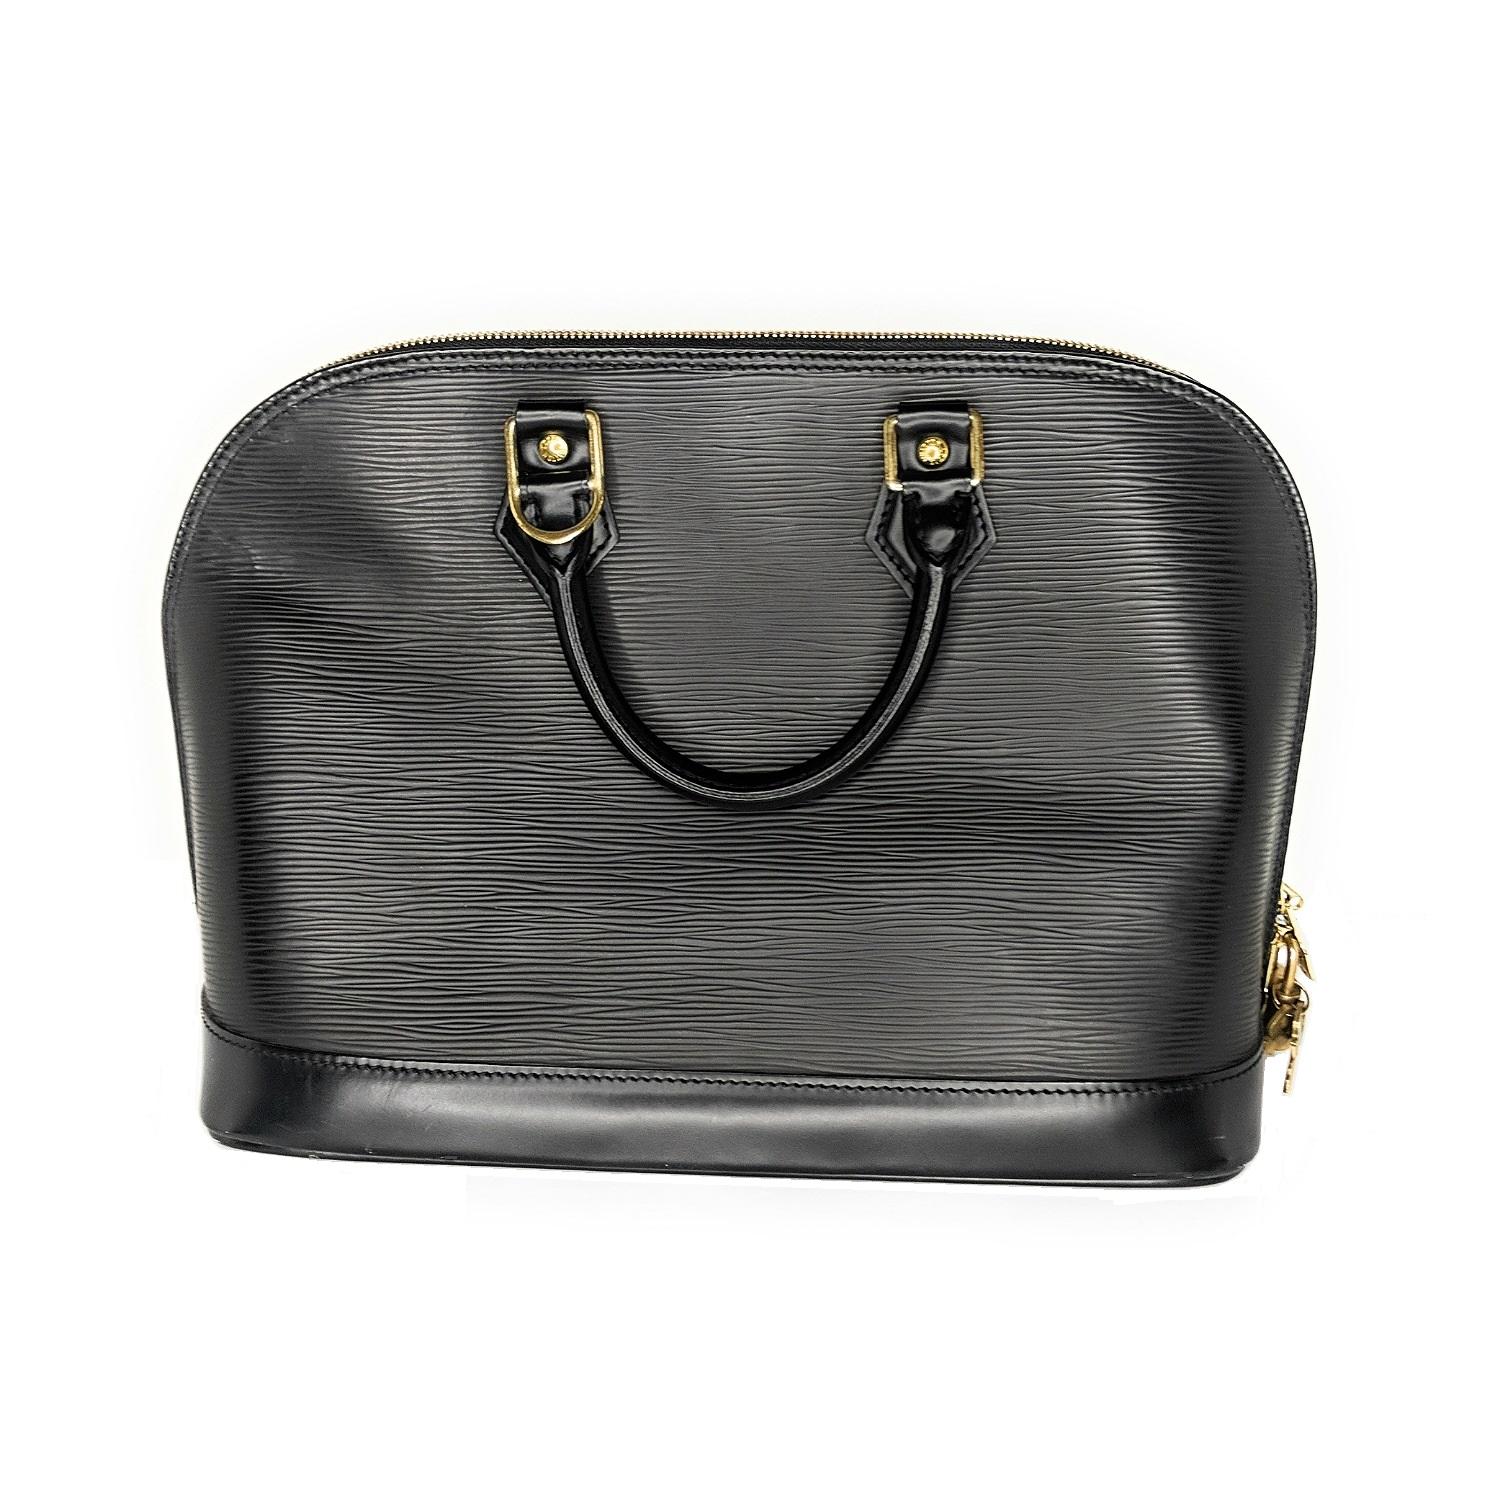 This is a stylish bag with a unique and characteristic look that is crafted of Louis Vuitton's signature textured epi leather in black. The bag features cowhide rolled leather top handles and trim with polished golden hardware including handle rings